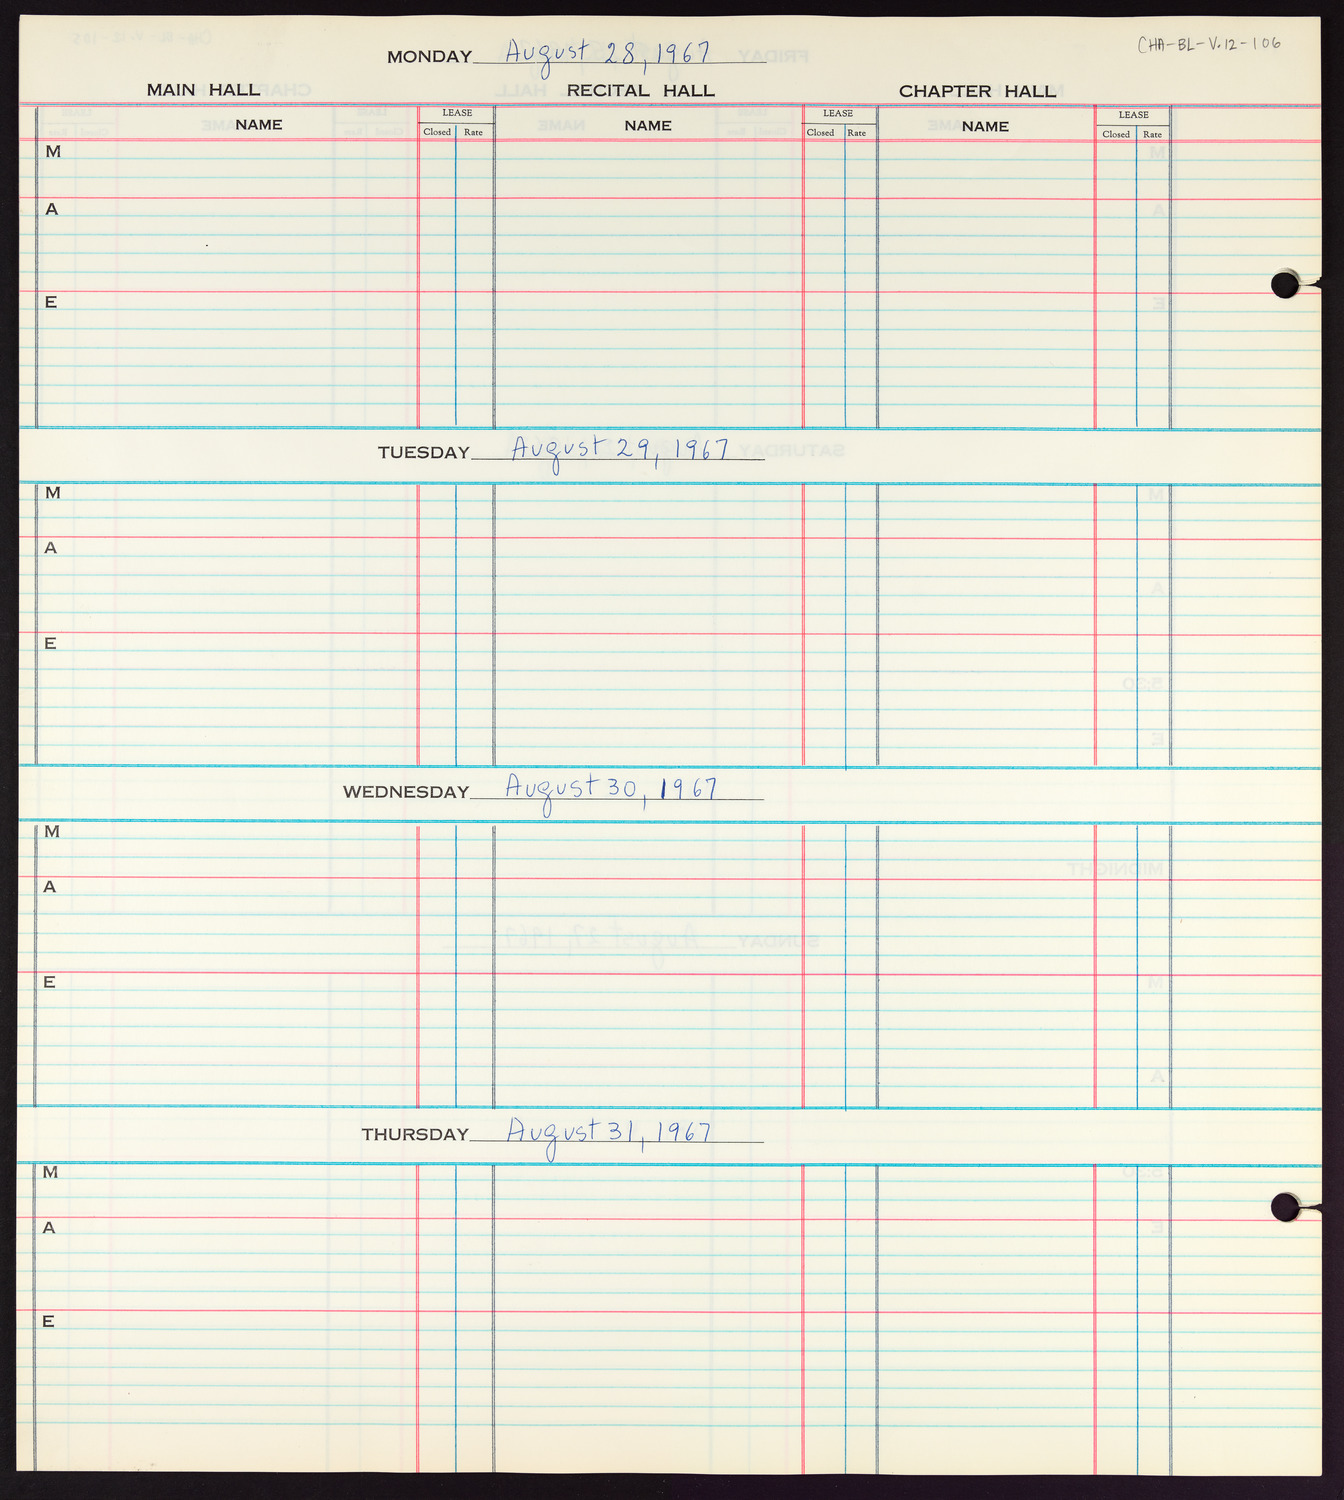 Carnegie Hall Booking Ledger, volume 12, page 106